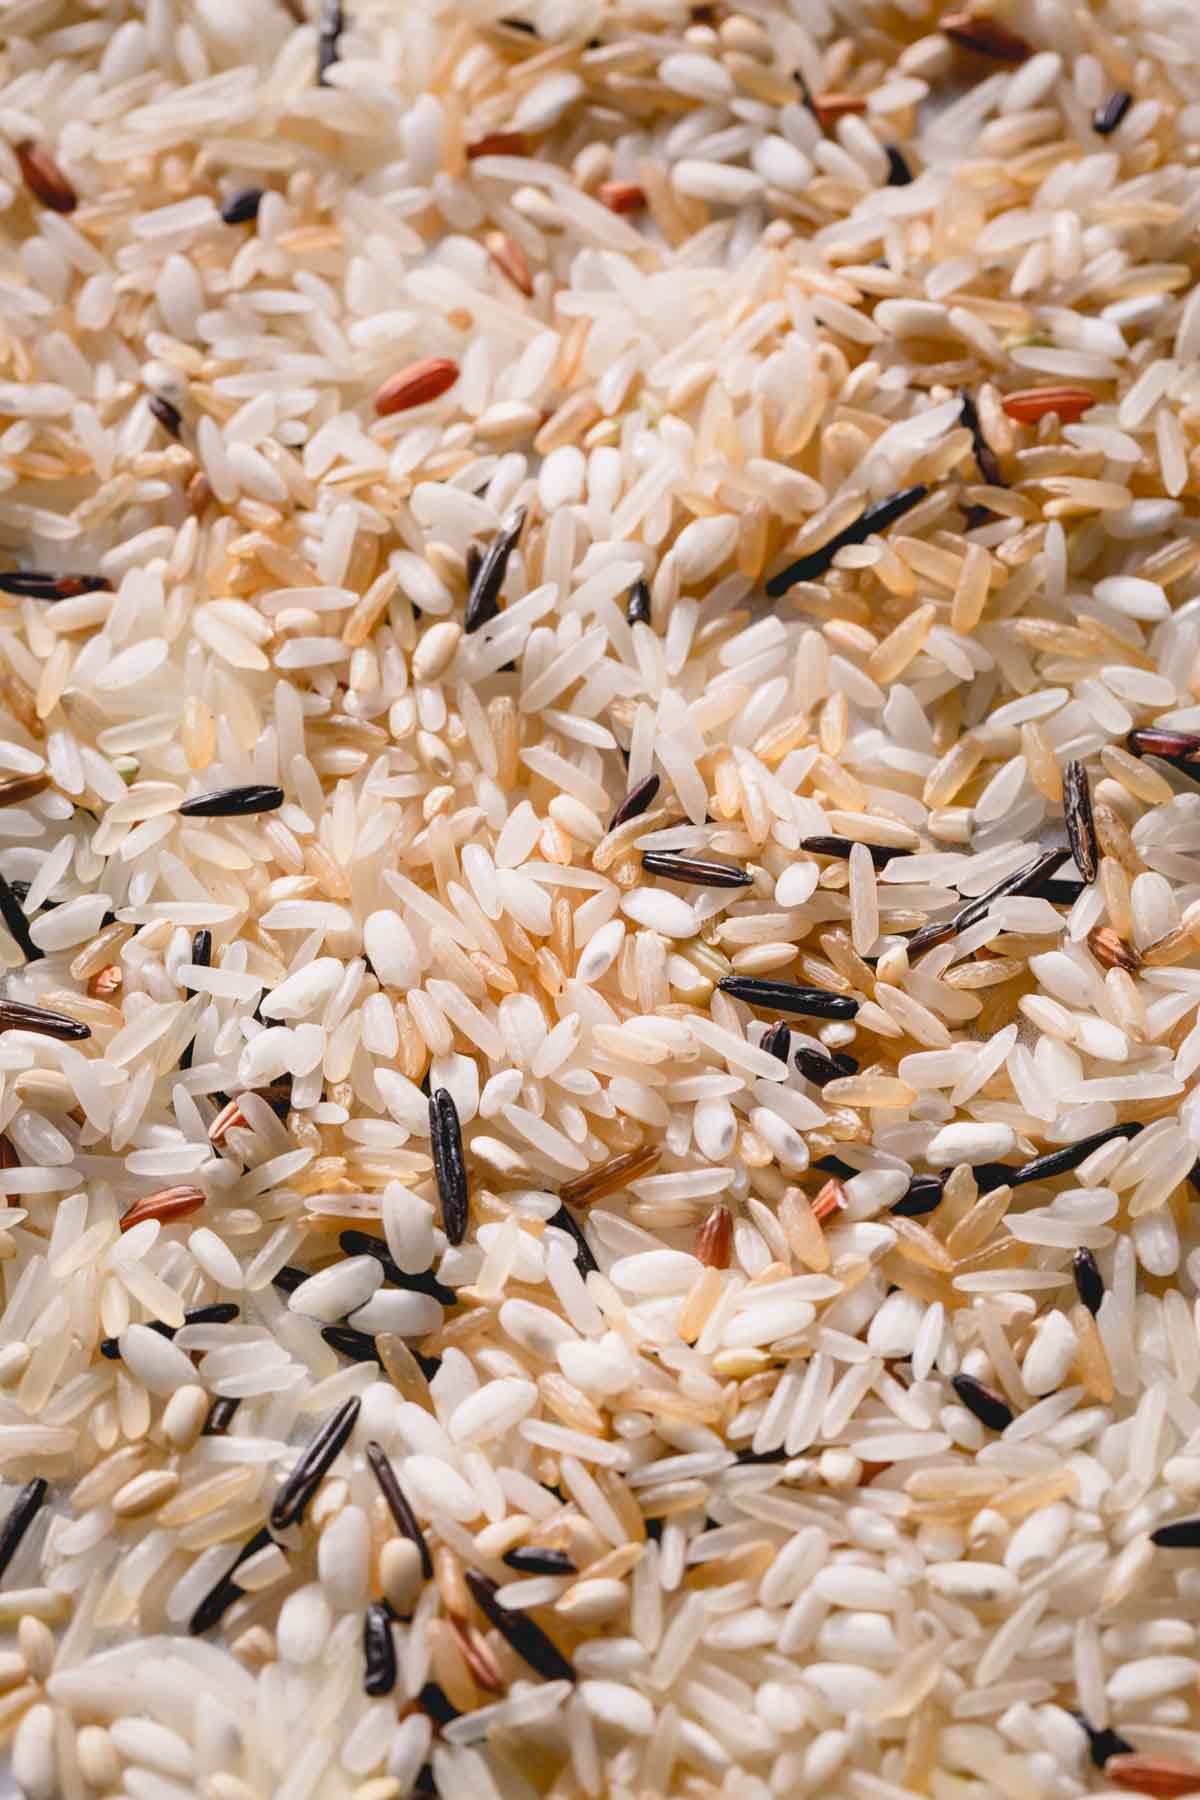 A mix of different varities of rice.